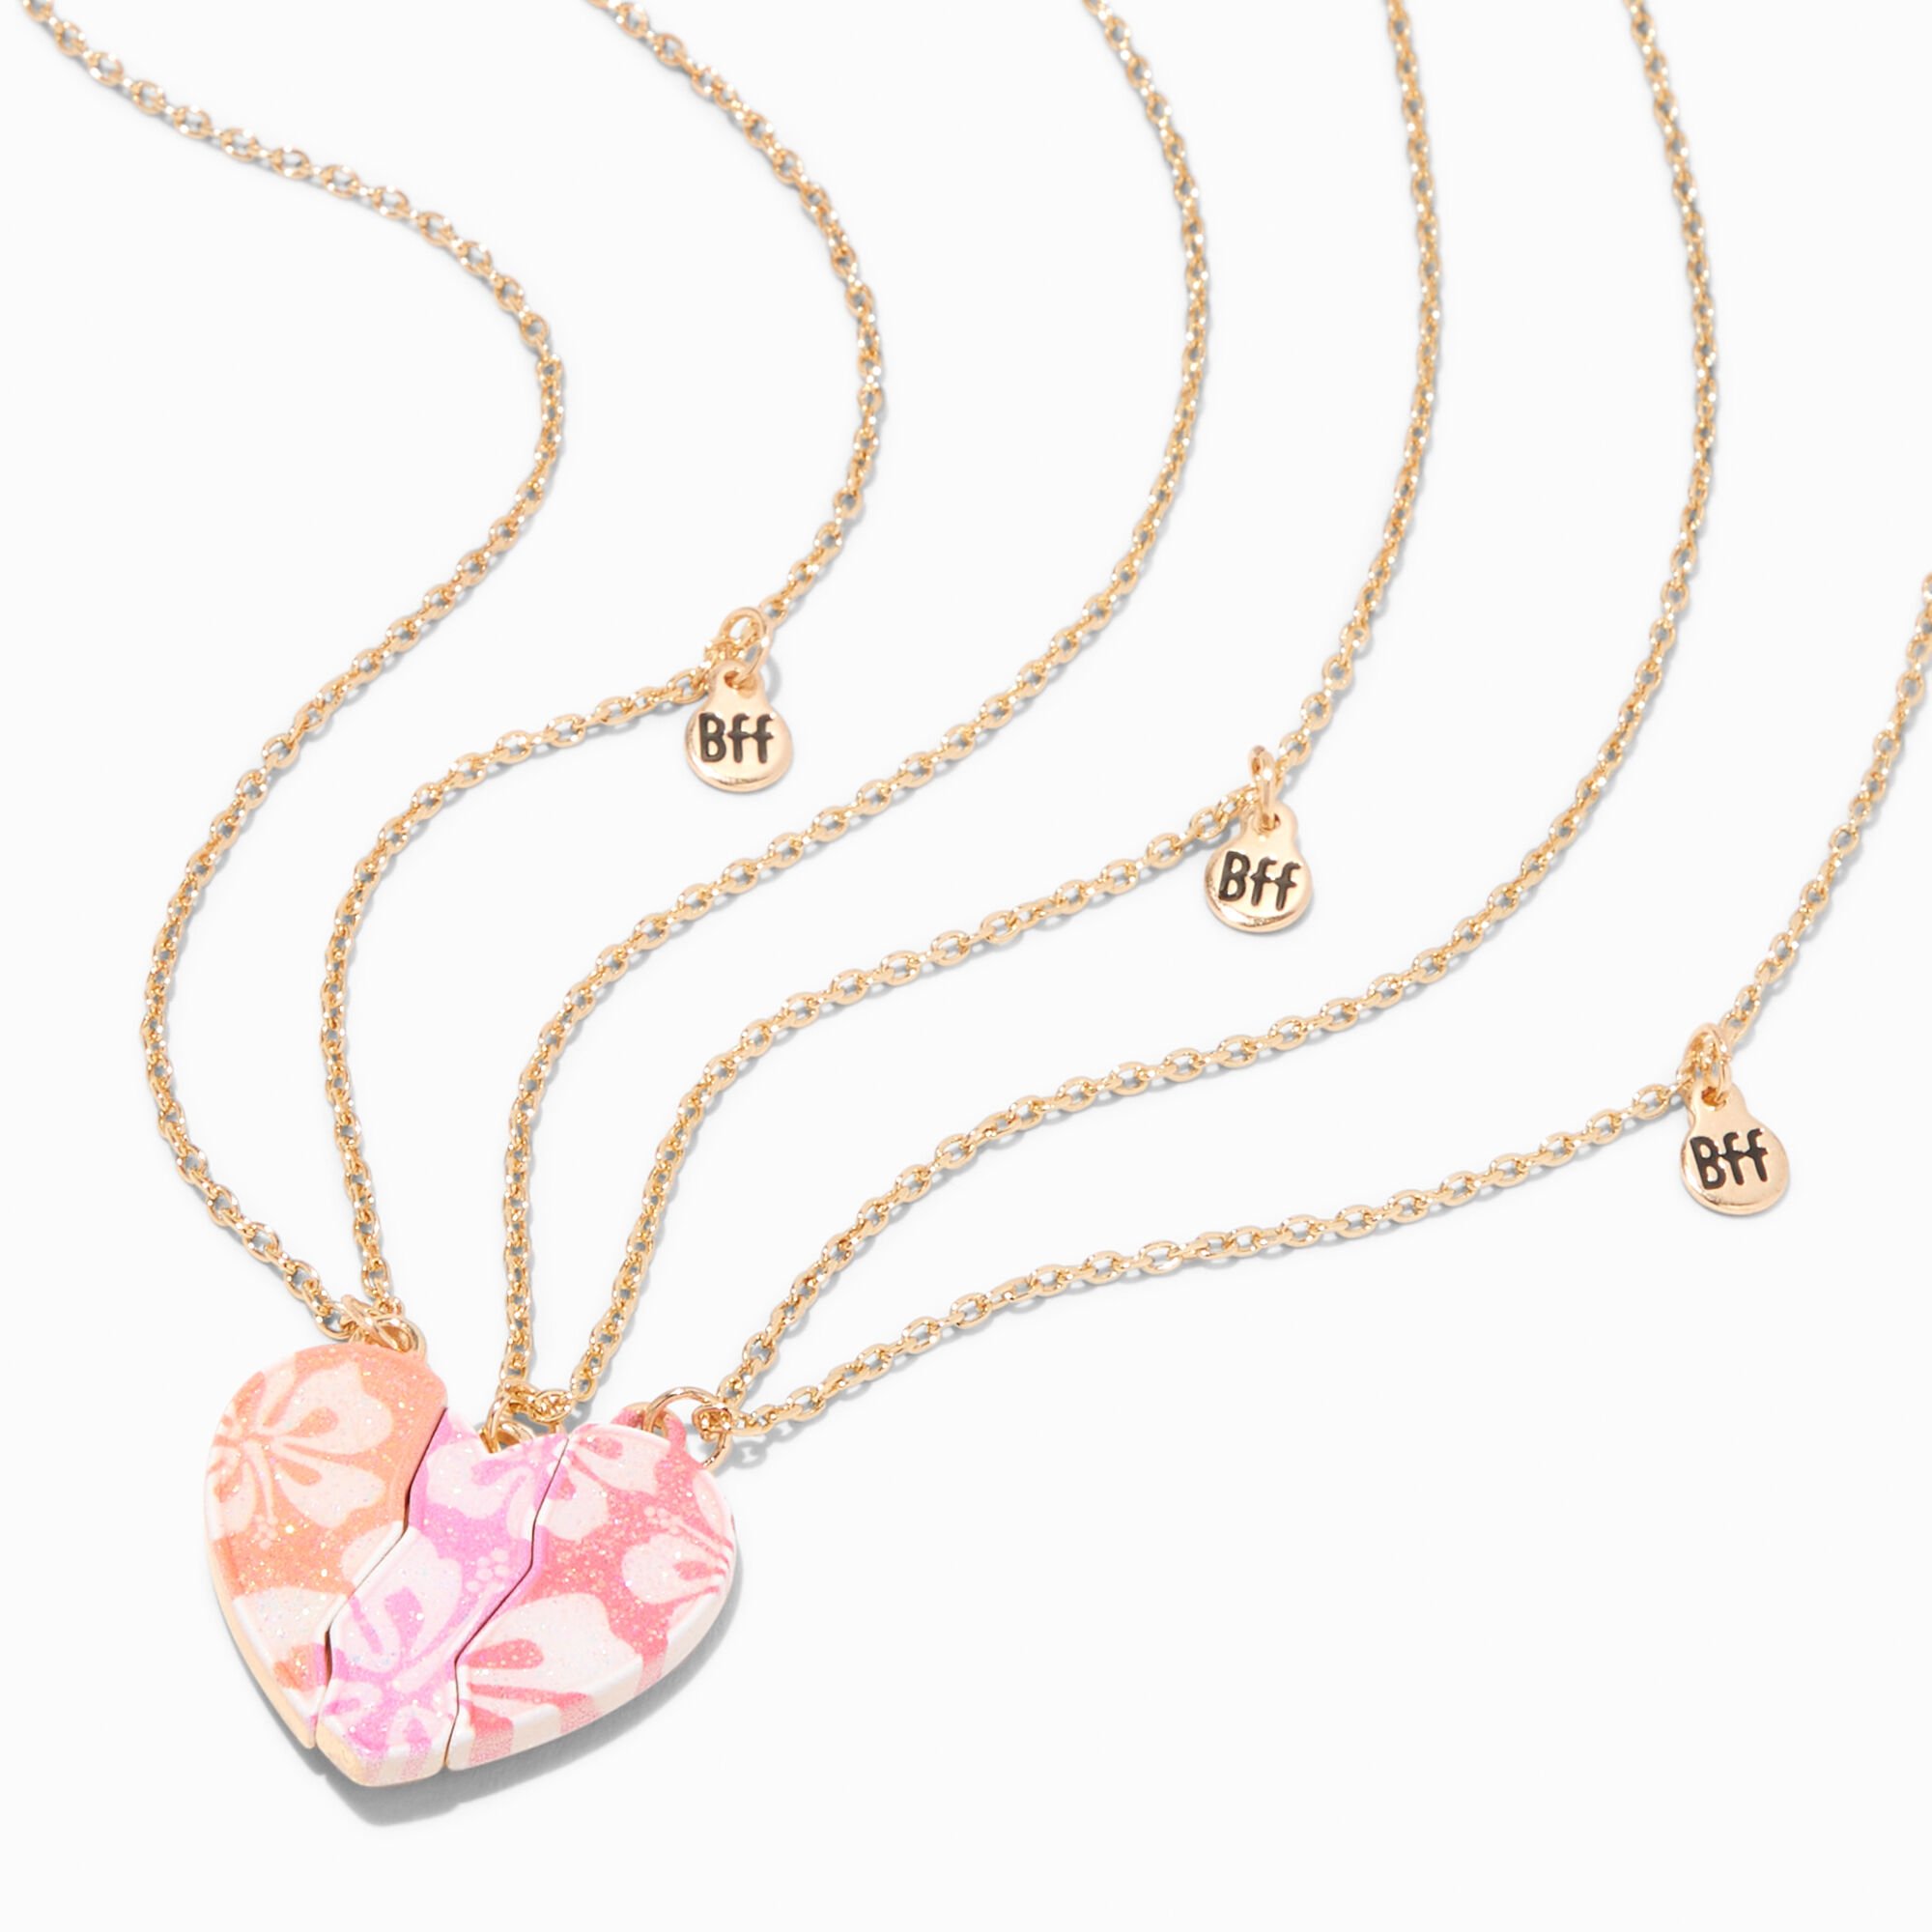 View Claires Best Friends Hibiscus Heart Pendant Necklaces 3 Pack Gold information